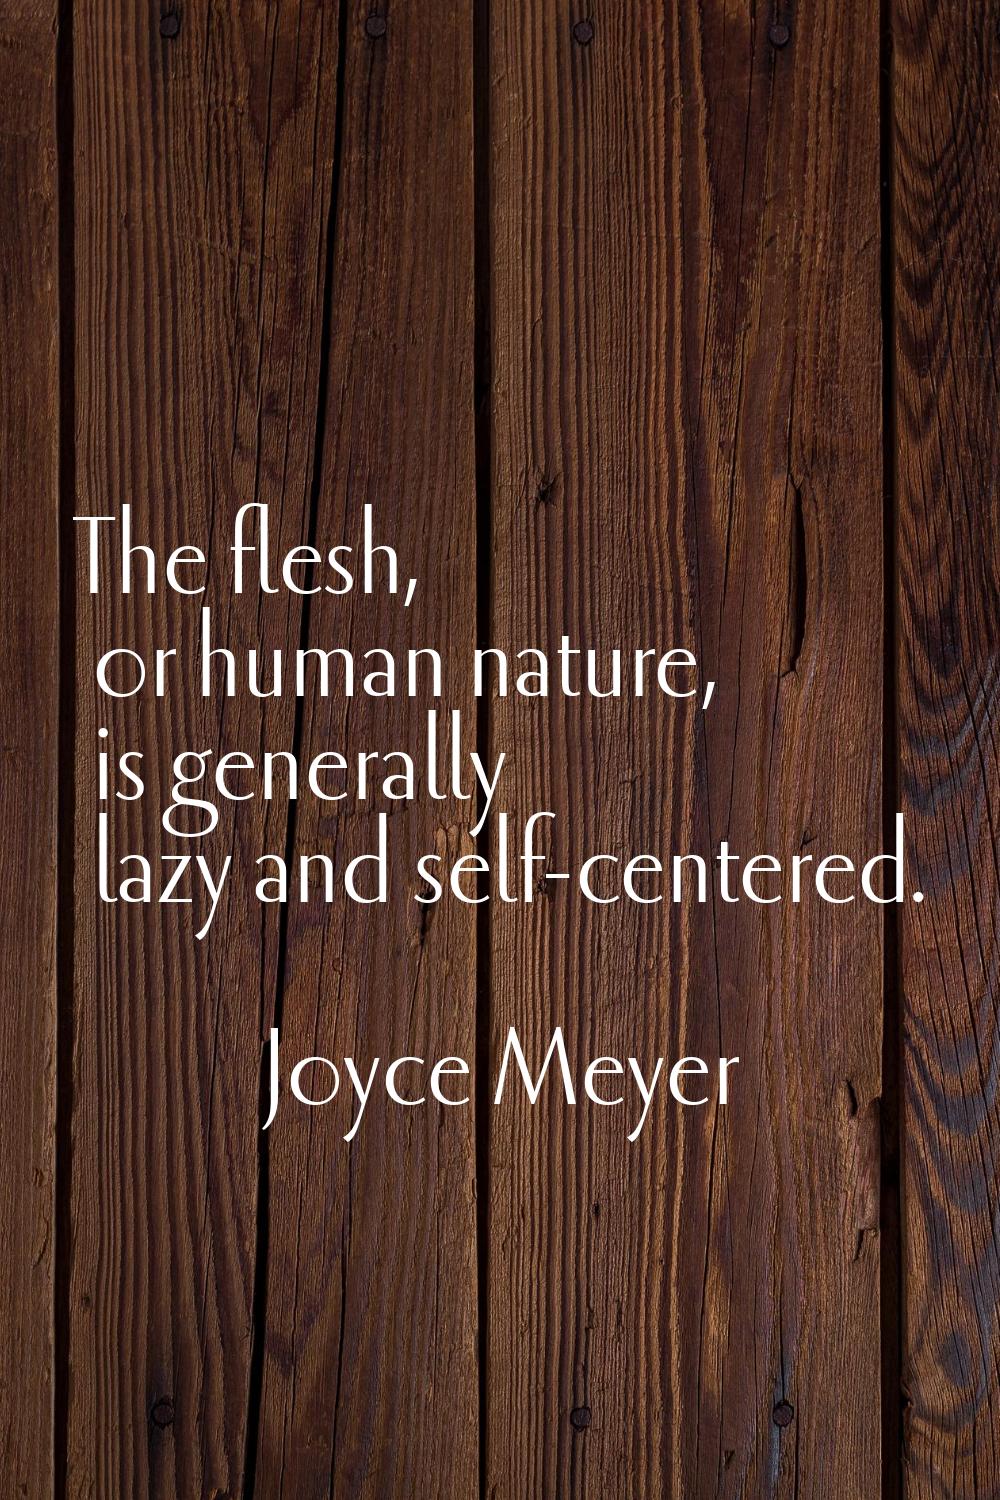 The flesh, or human nature, is generally lazy and self-centered.